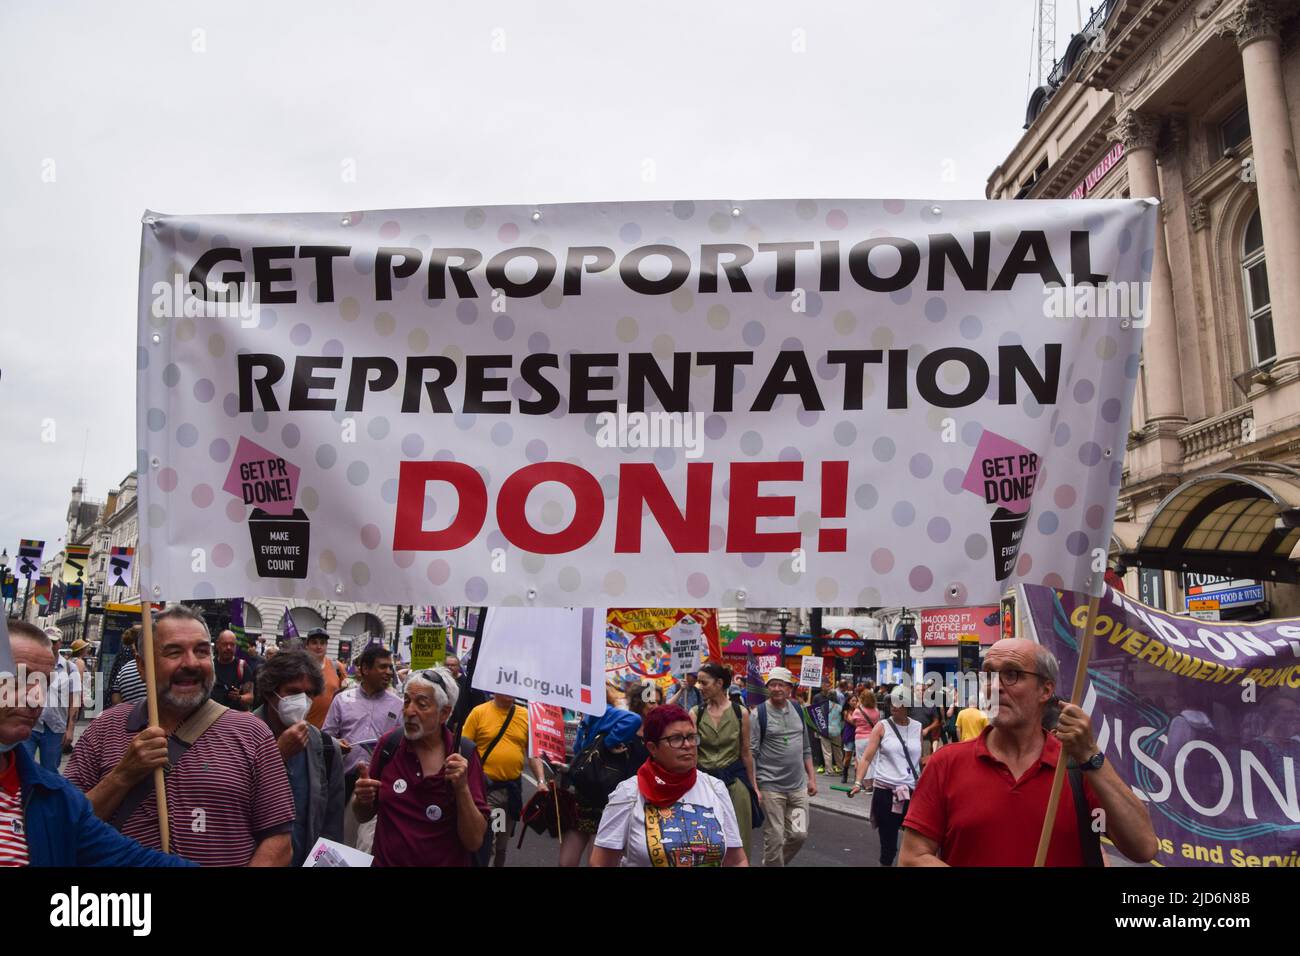 London, UK. 18th June, 2022. Protesters hold a banner which reads 'Get proportional representation done' during the demonstration in Piccadilly Circus. Thousands of people and various trade unions and groups marched through central London in protest against the cost of living crisis, the Tory Government, the Rwanda refugee scheme and other issues. Credit: SOPA Images Limited/Alamy Live News Stock Photo